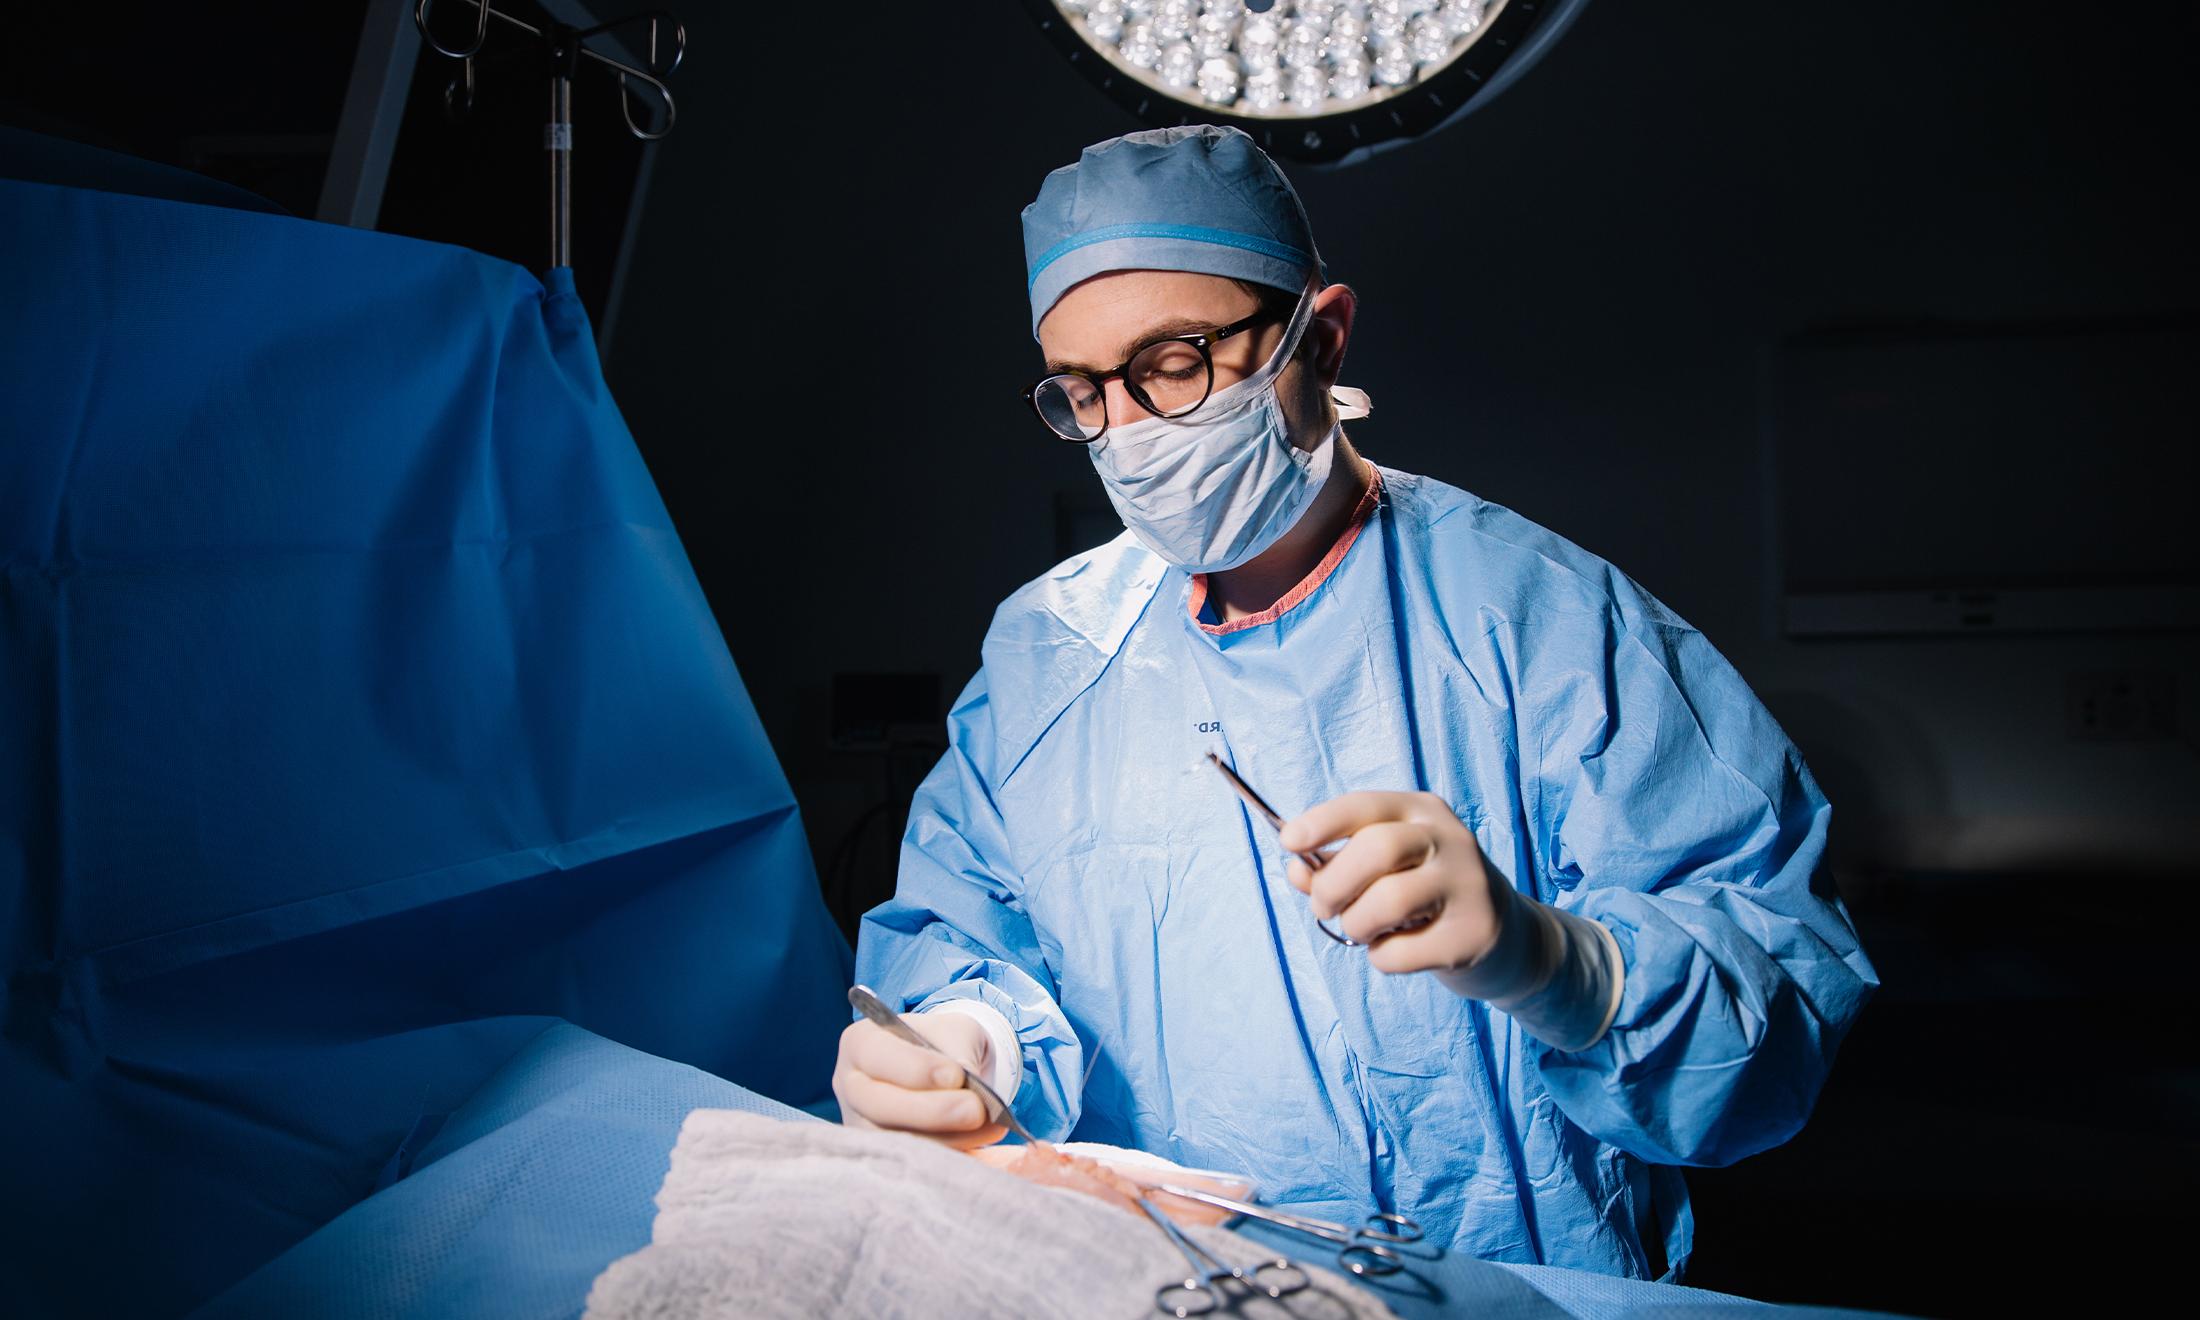 An image of a doctor in an operating room